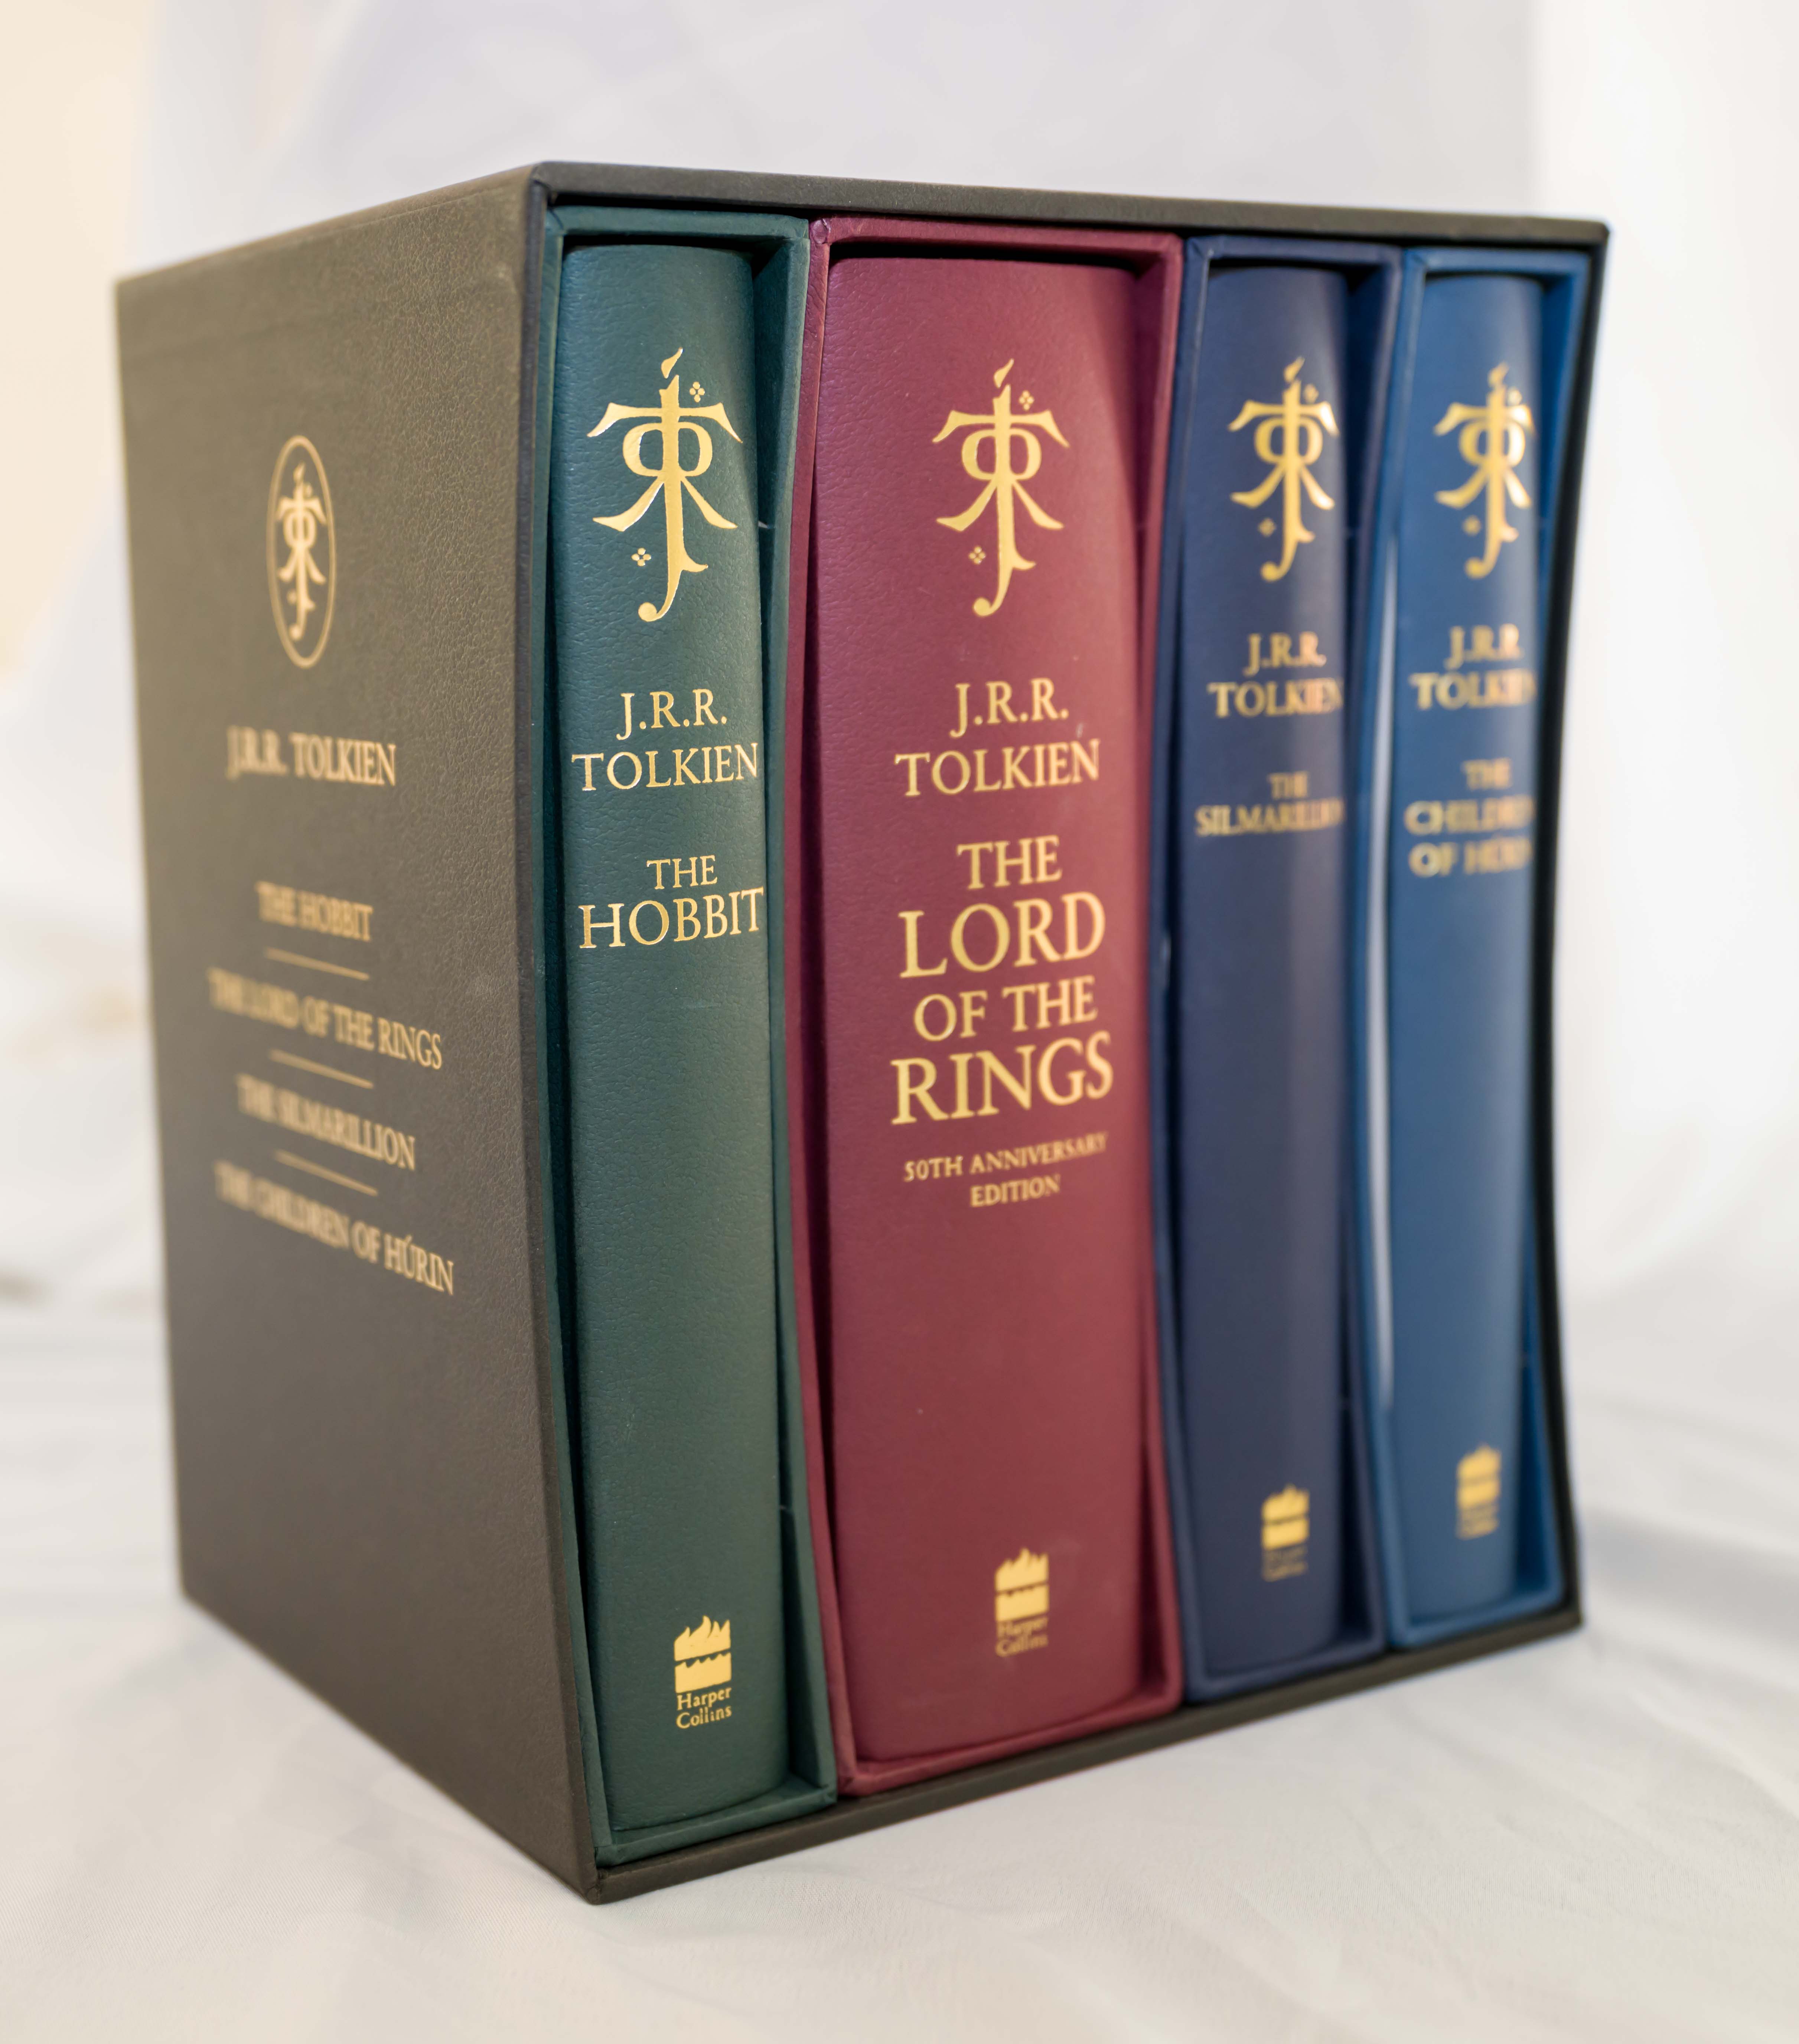 The J.R.R. Tolkien Deluxe Edition Collection in Original Publishers Slipcase, Limited to 500 Sets 2